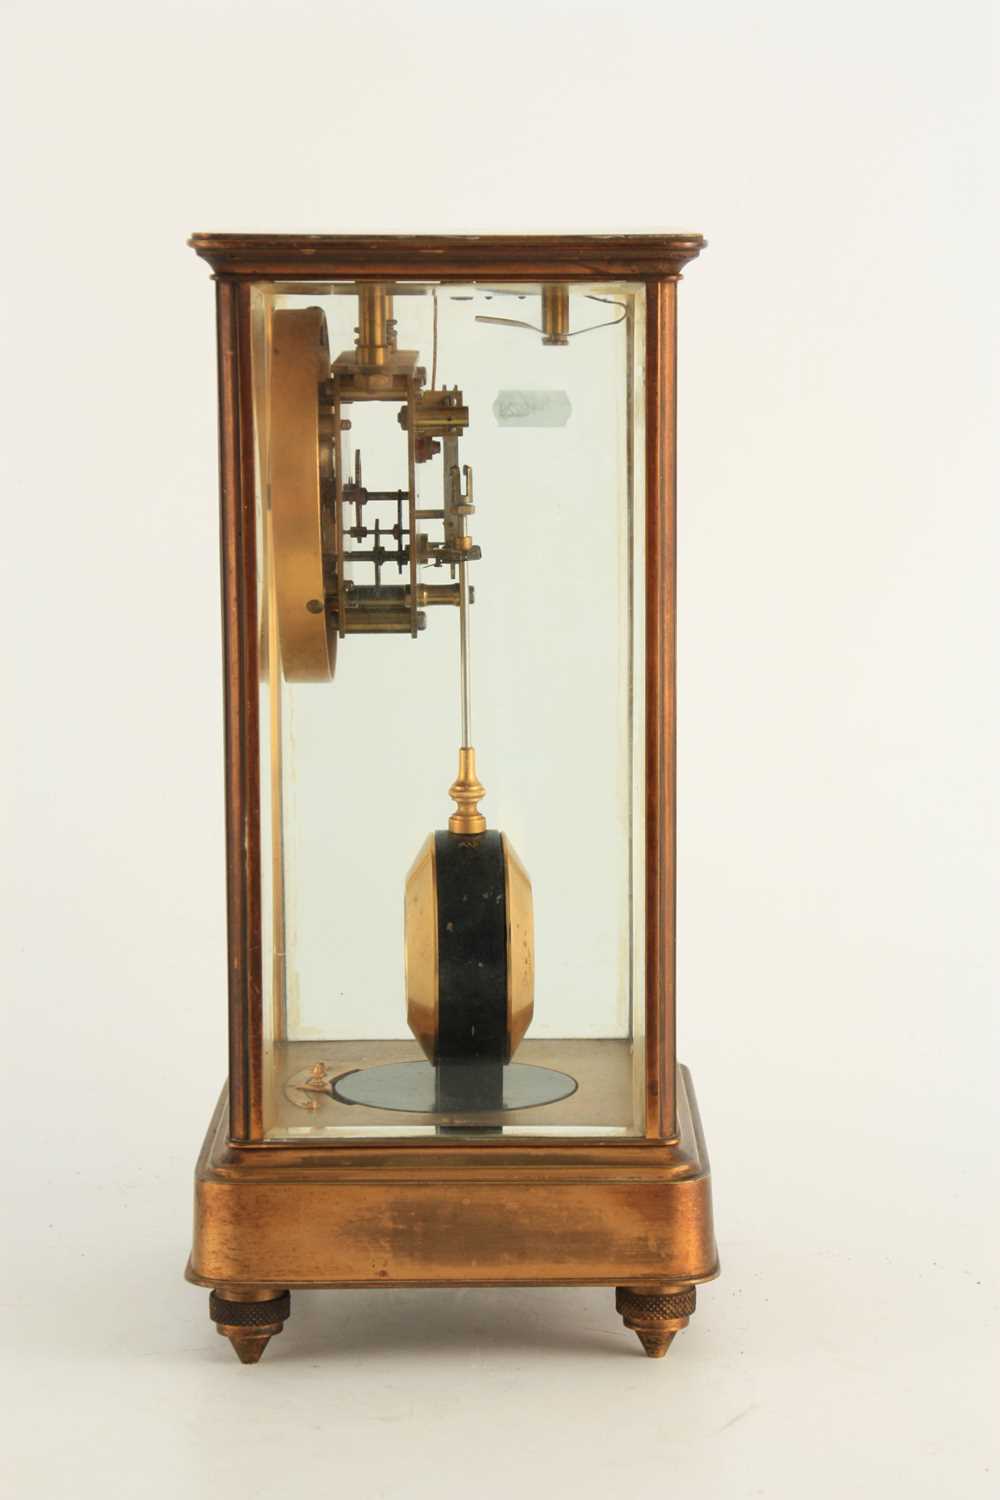 L. LEROY & CO. PARIS A RARE AND GOOD QUALITY EARLY 20TH CENTURY ELECTRIC FOUR-GLASS MANTEL CLOCK - Image 5 of 5